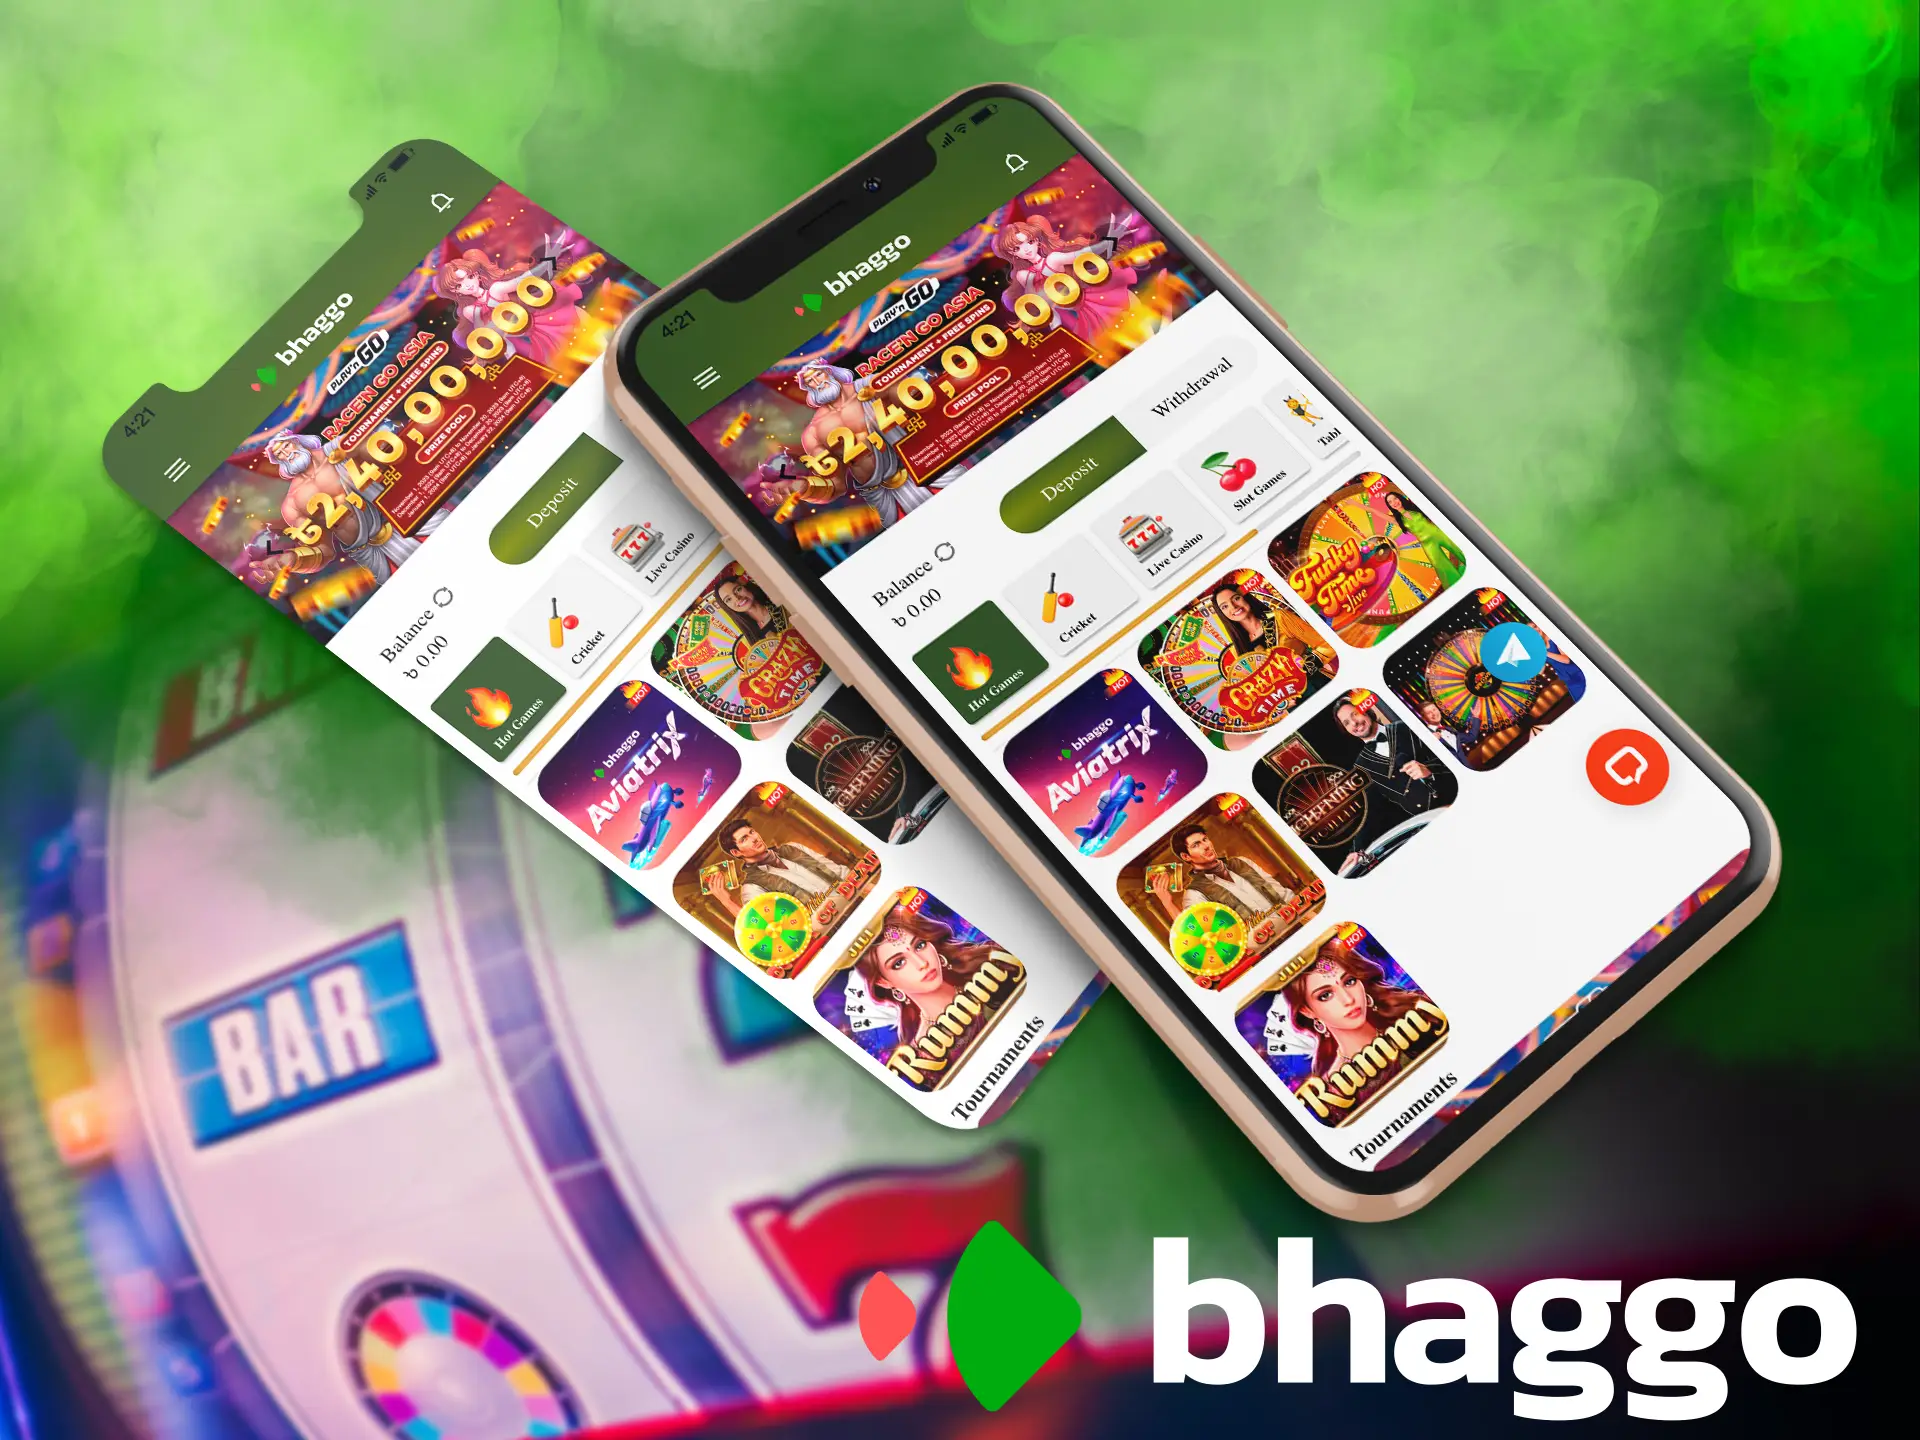 Bhaggo has a unique smartphone software in which you get all the features of the site only faster.